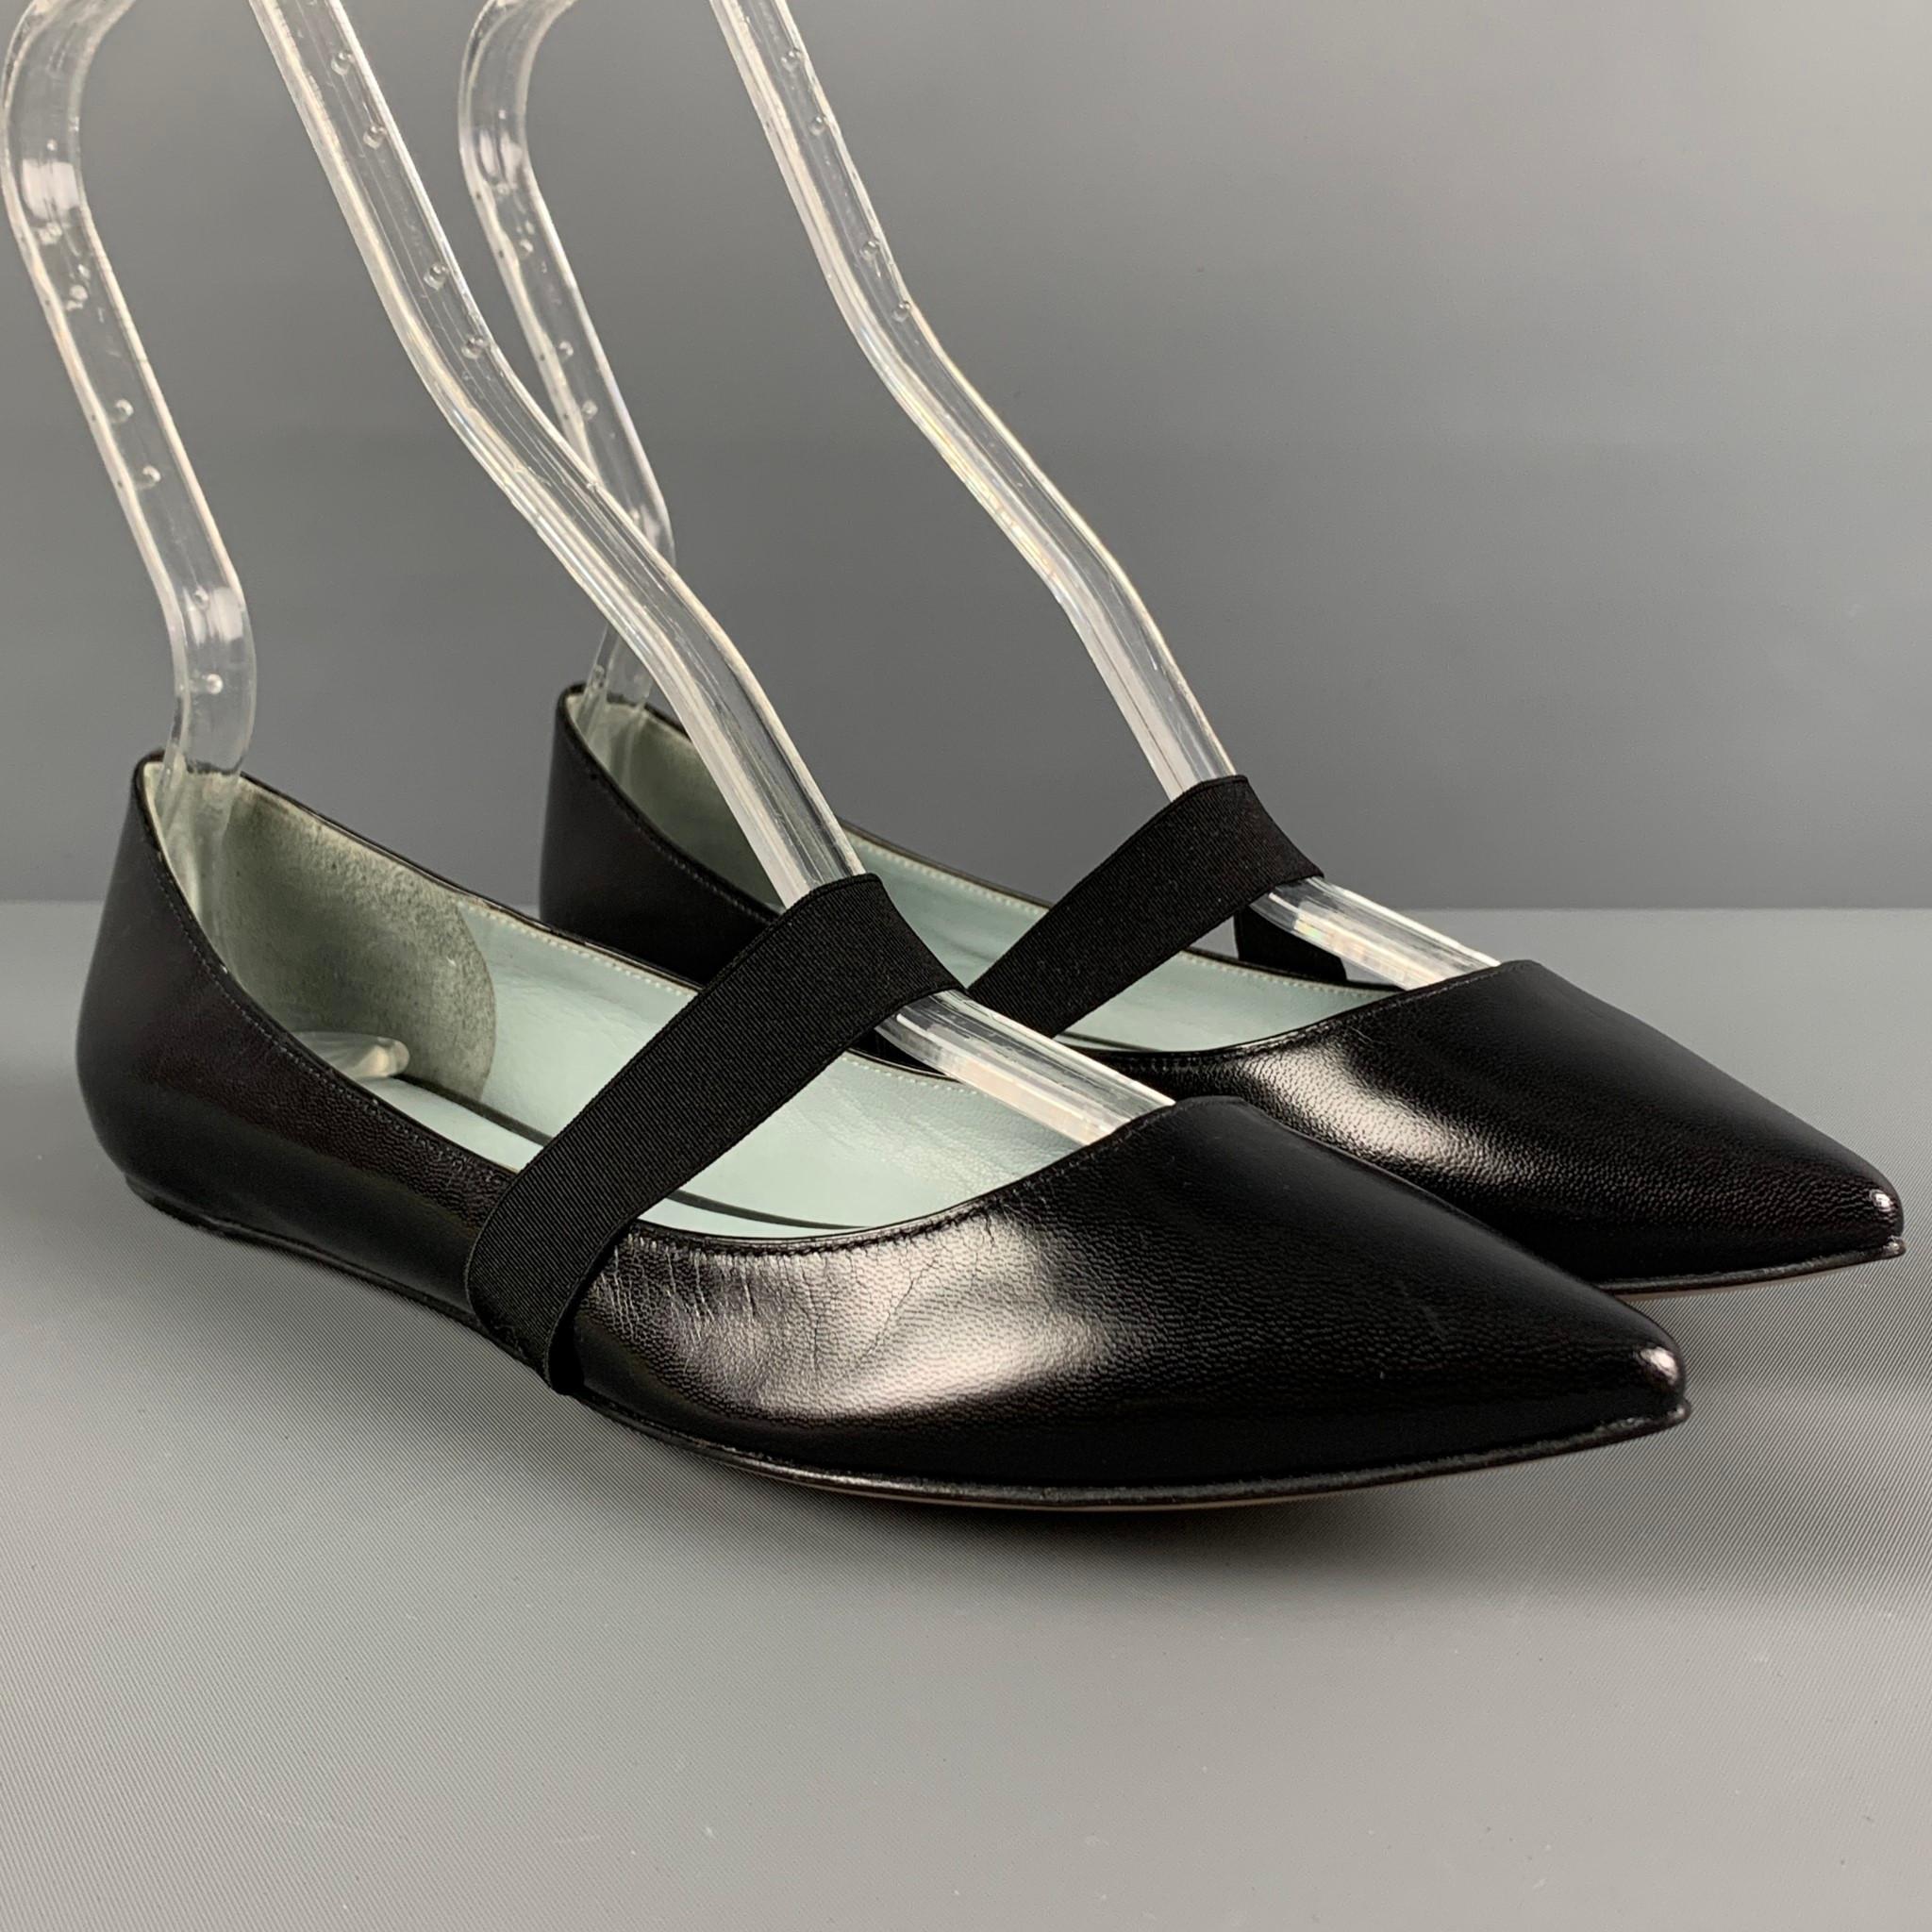 MARC JACOBS flats comes in a black leather featuring a mary jane style, elastic strap, and a pointed toe. 

Very Good Pre-Owned Condition.
Marked: 38.5

Outsole: 10.5 in. x 3.25 in.